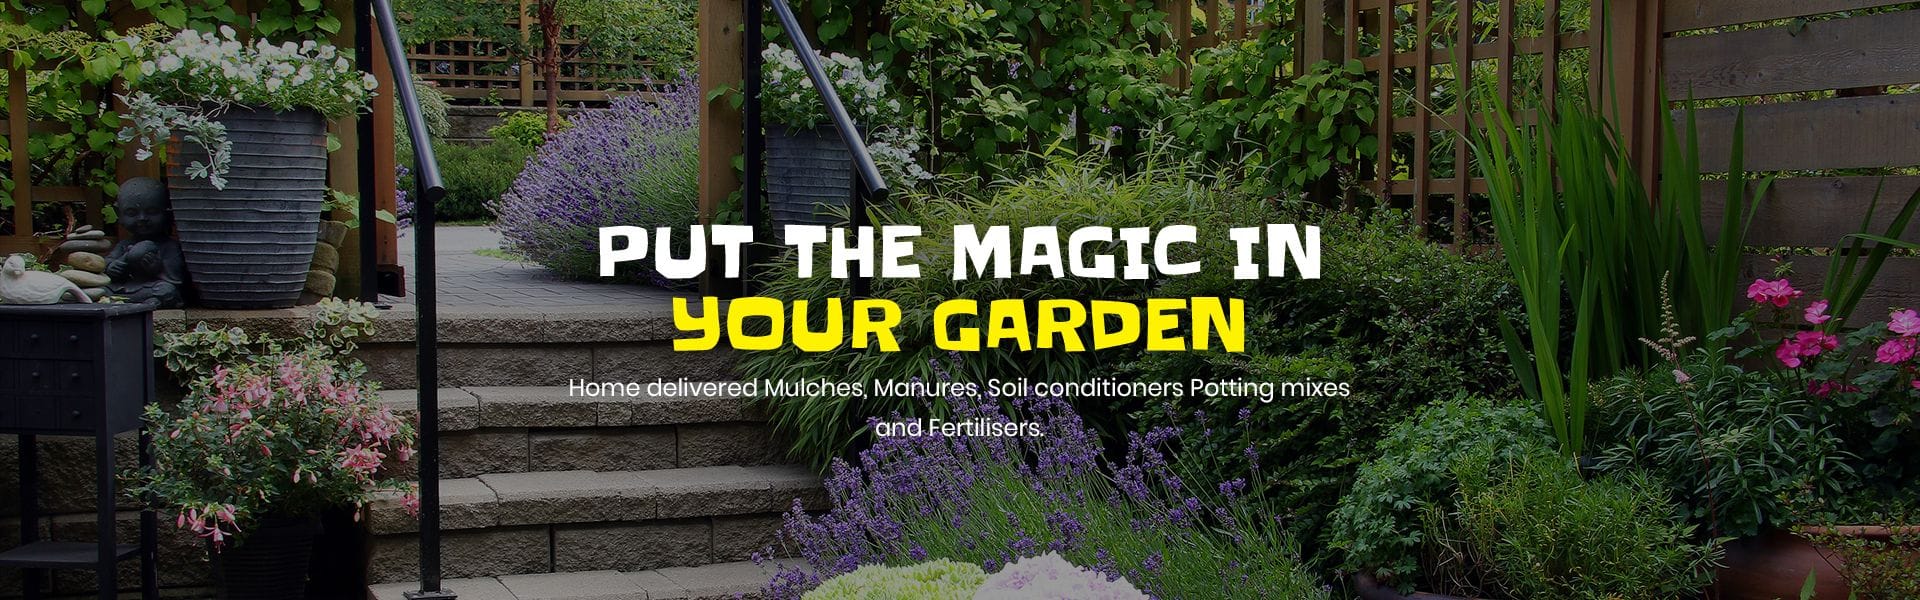 MANURE MAGIC | Providing premium quality home delivered garden products to the Perth metropolitan area